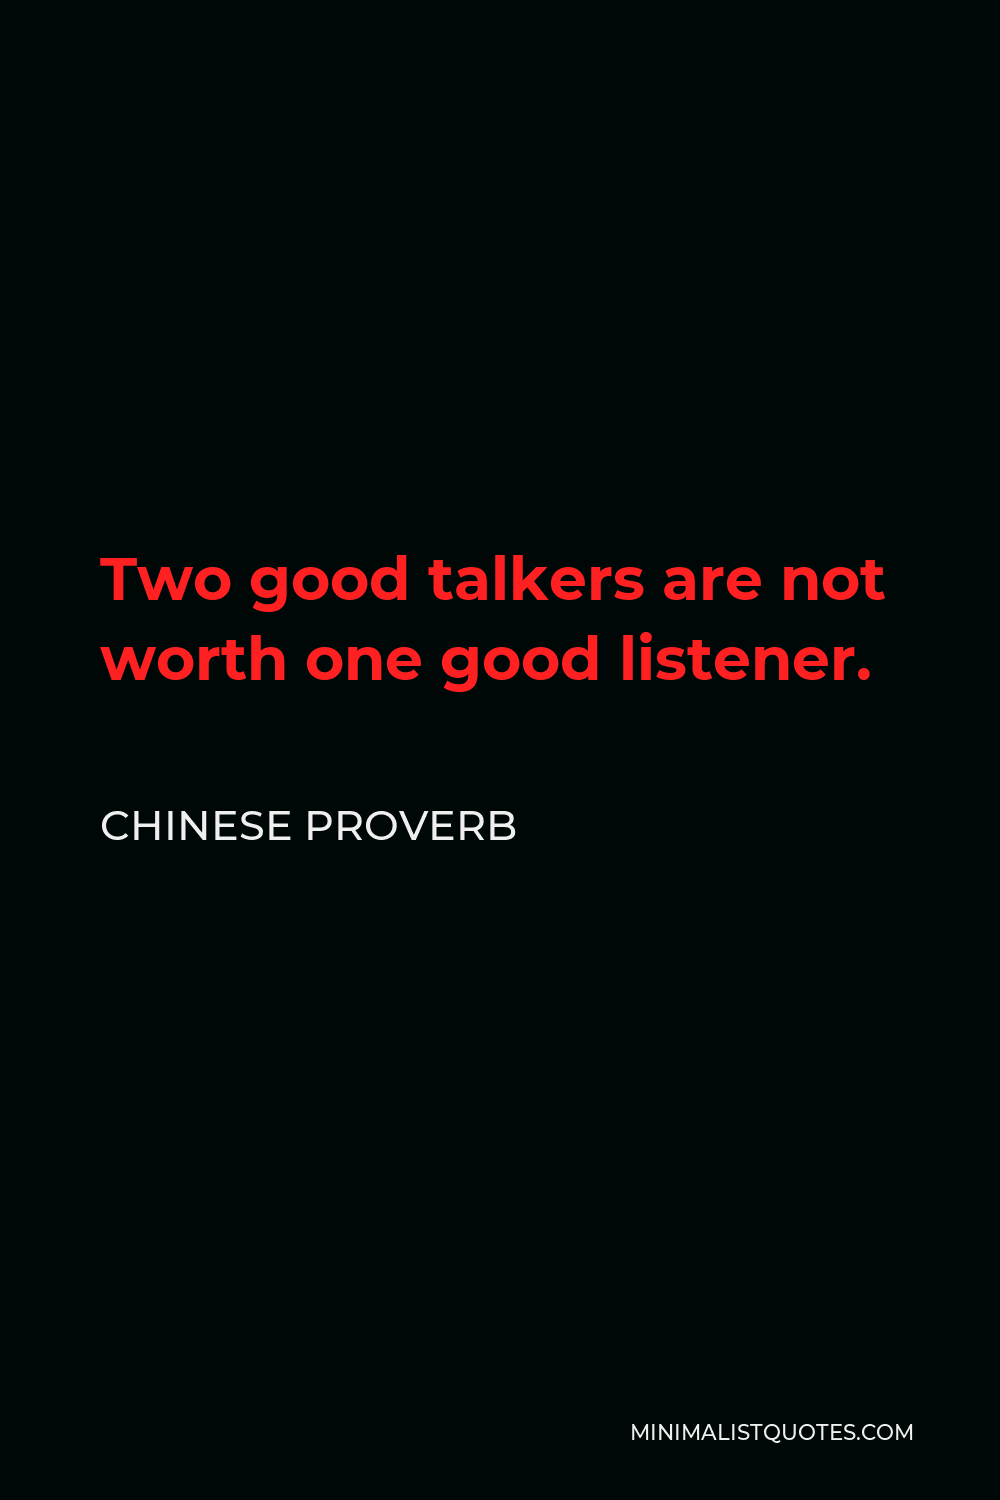 Chinese Proverb Quote - Two good talkers are not worth one good listener.